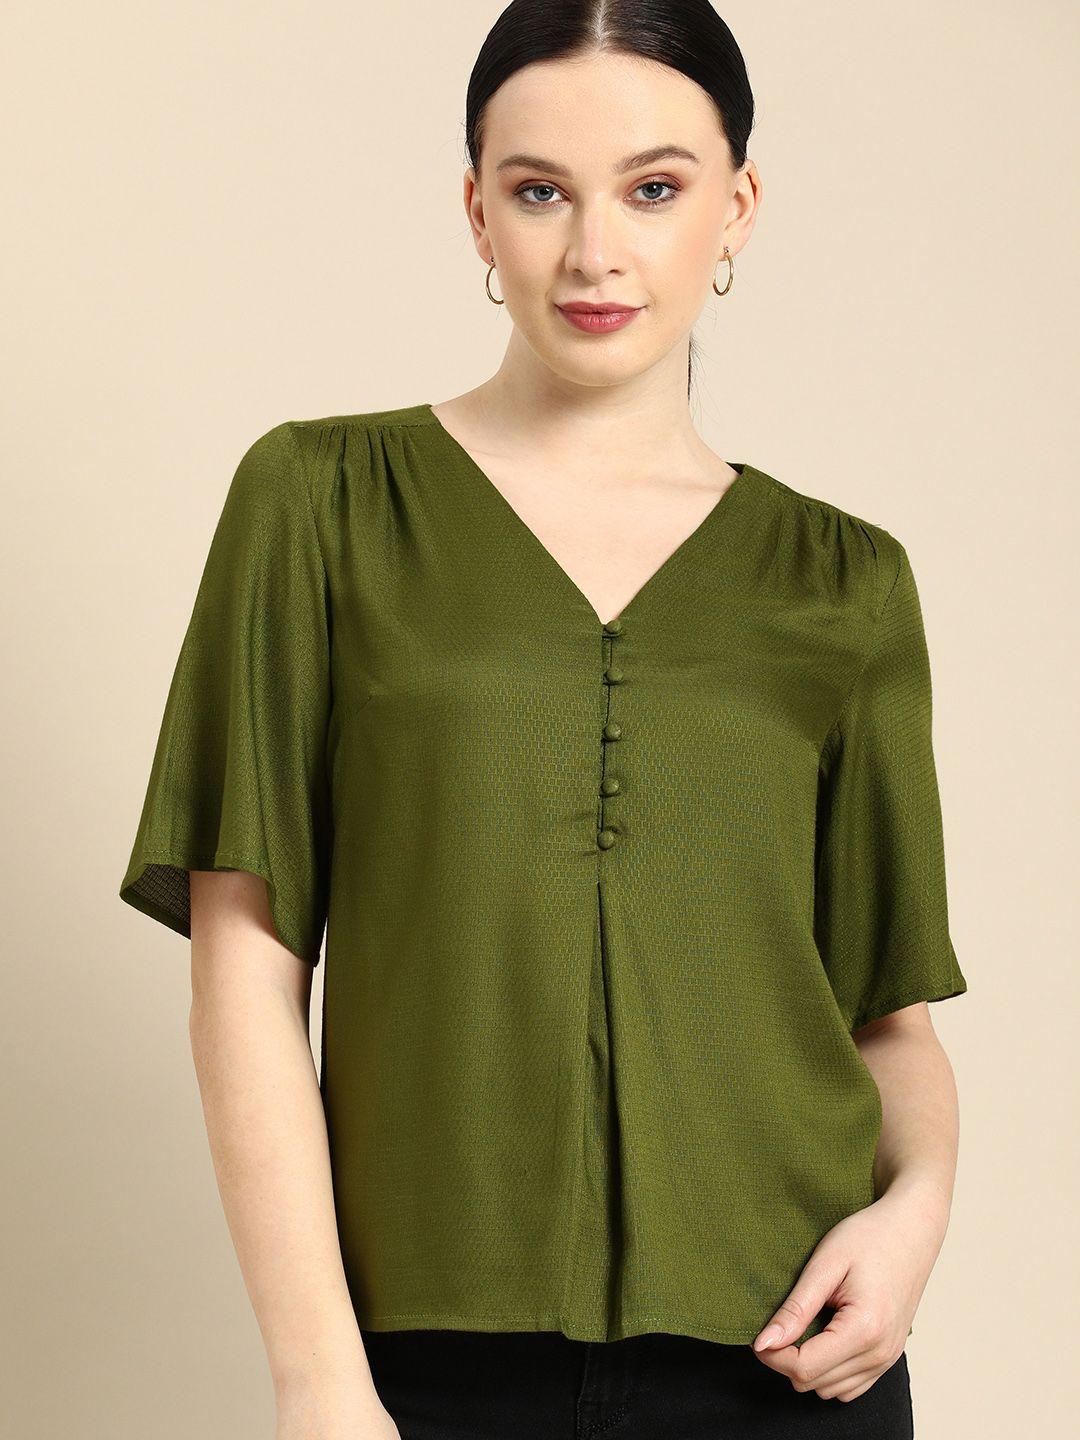 all about you solid olive green v-neck regular top